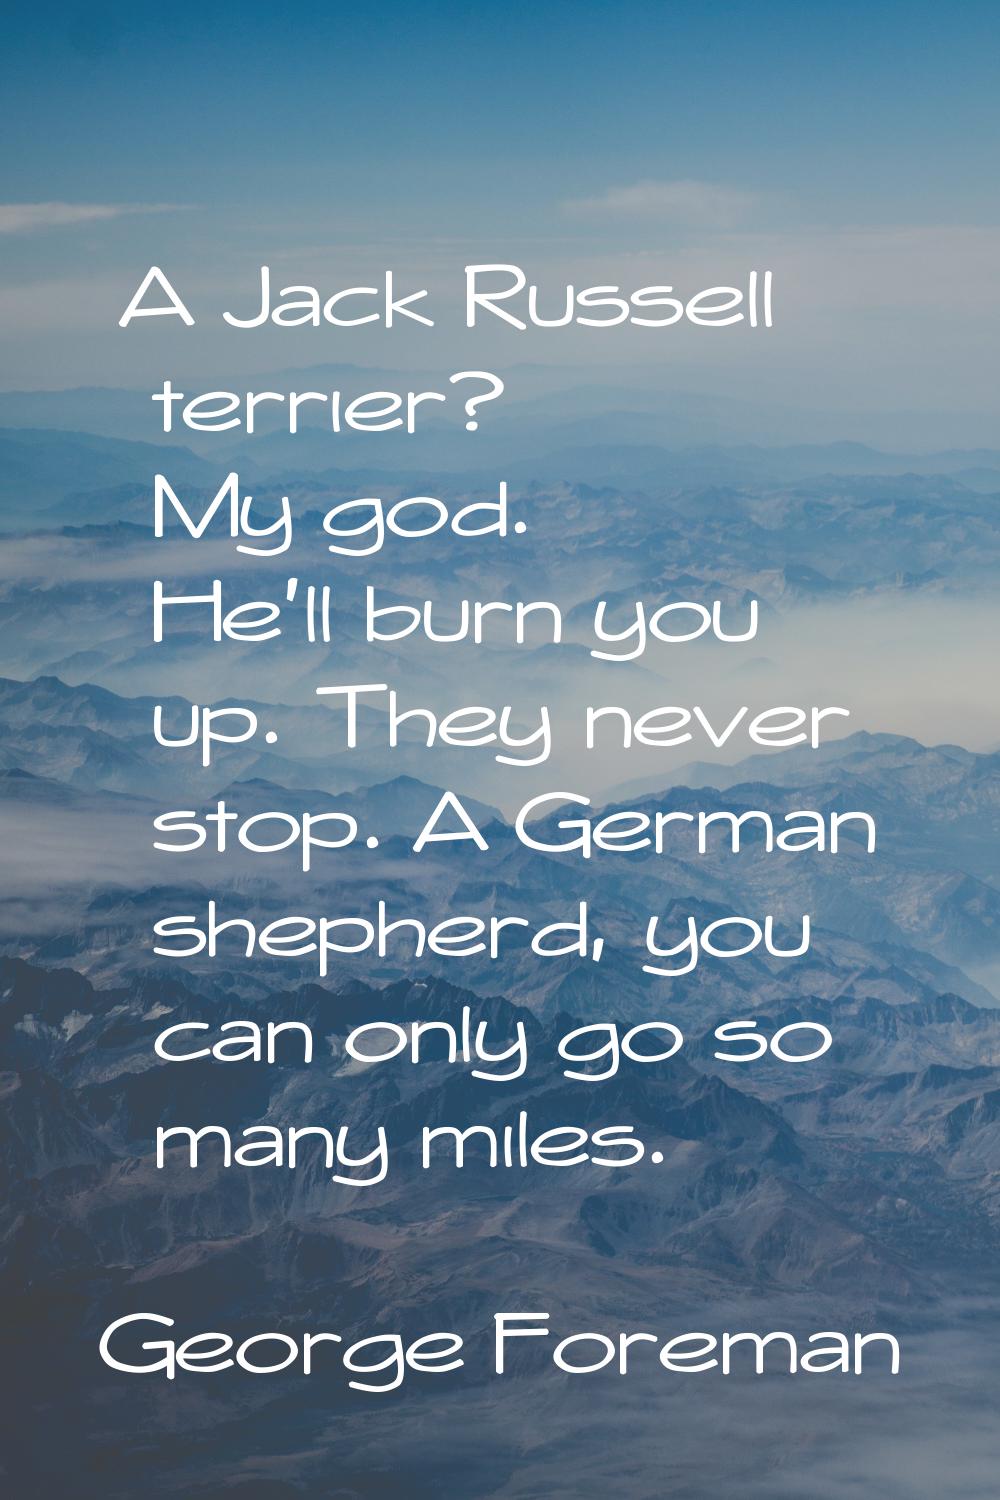 A Jack Russell terrier? My god. He'll burn you up. They never stop. A German shepherd, you can only